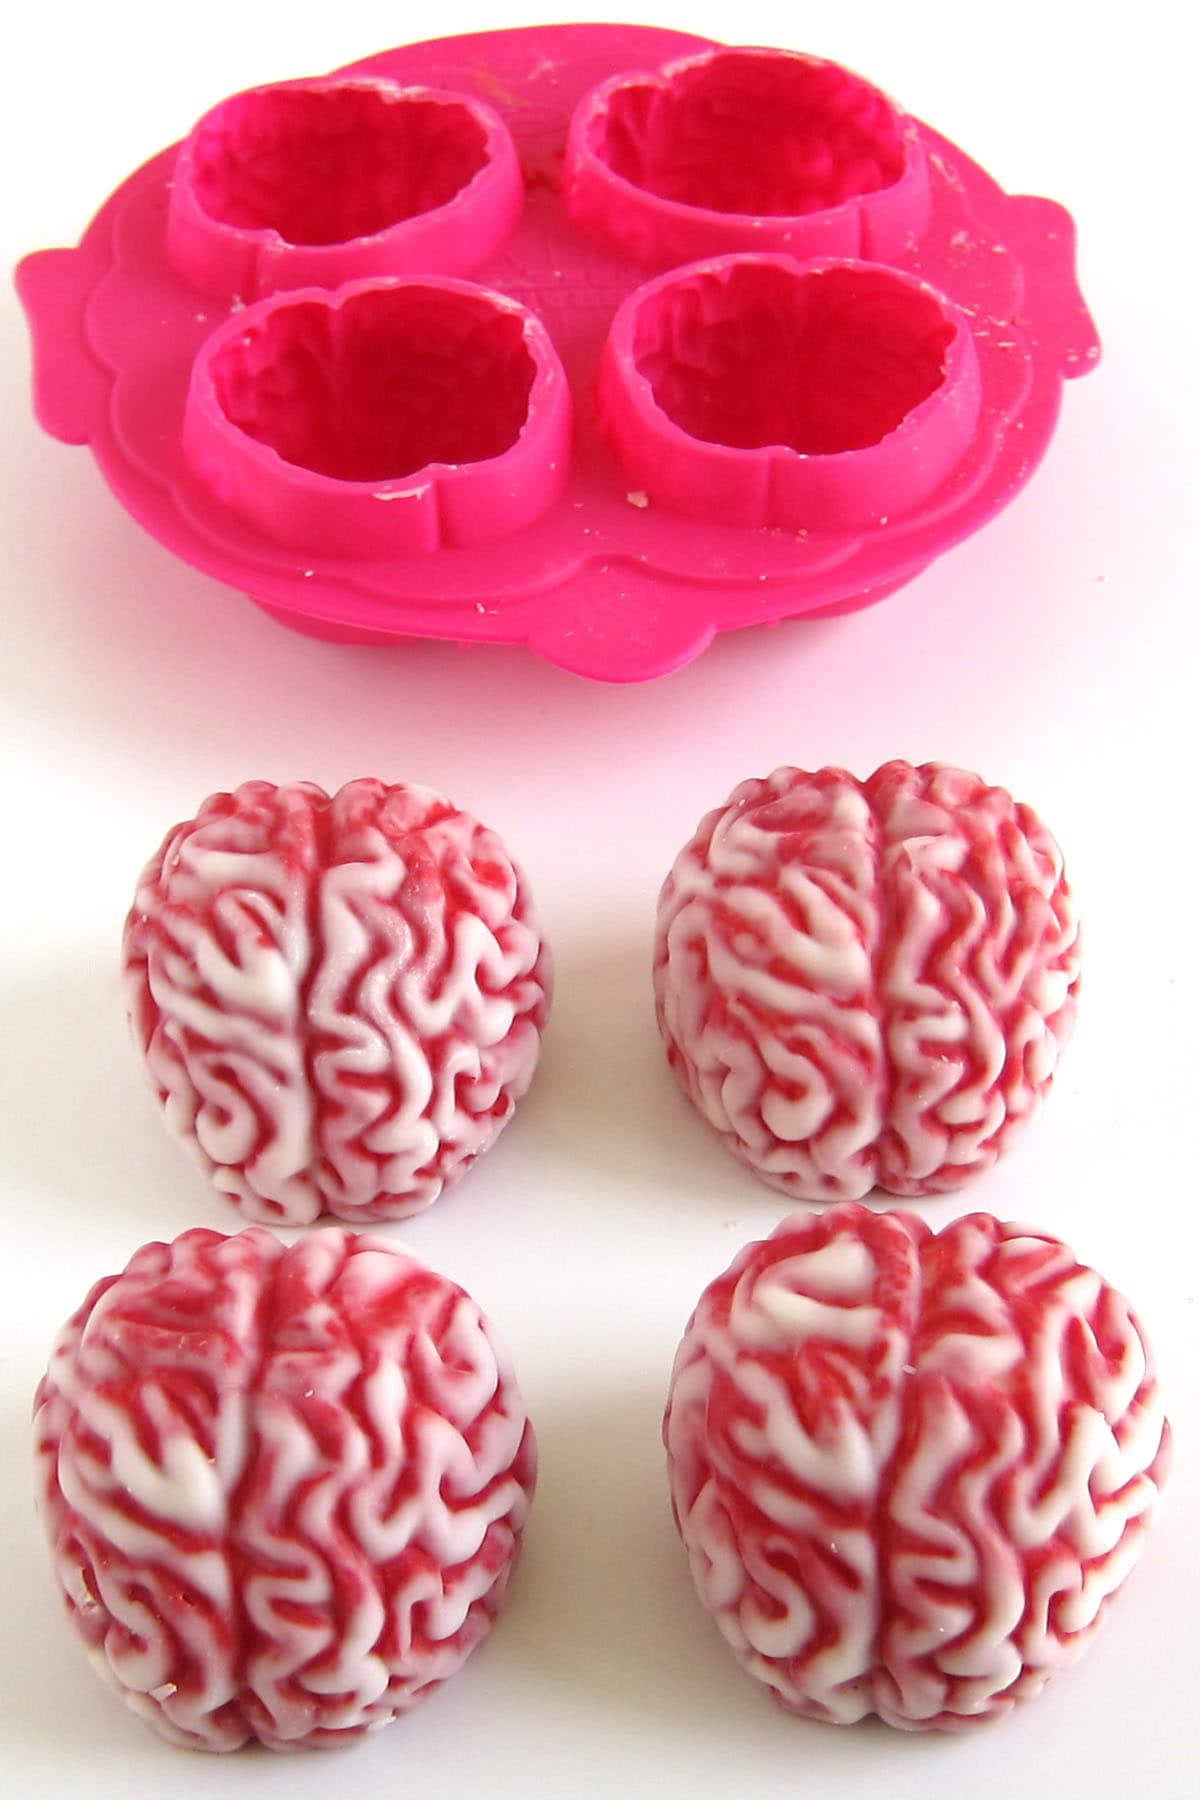 Brain-shaped hot chocolate bombs made using a silicone brain mold.